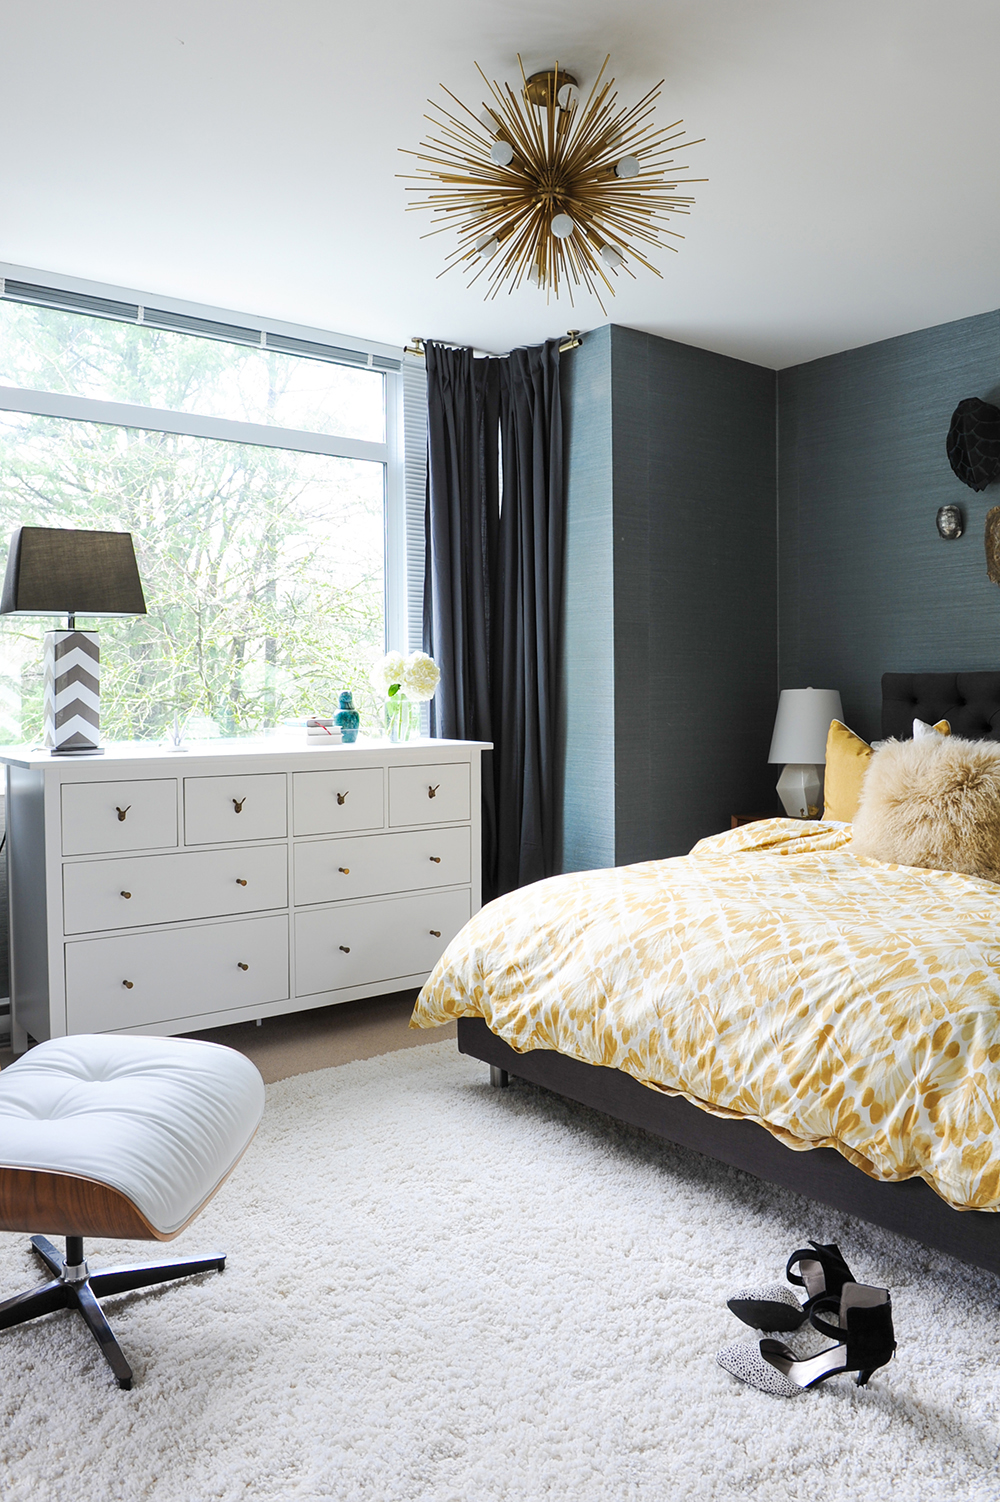 A dark and moody master bedroom with playful touches.